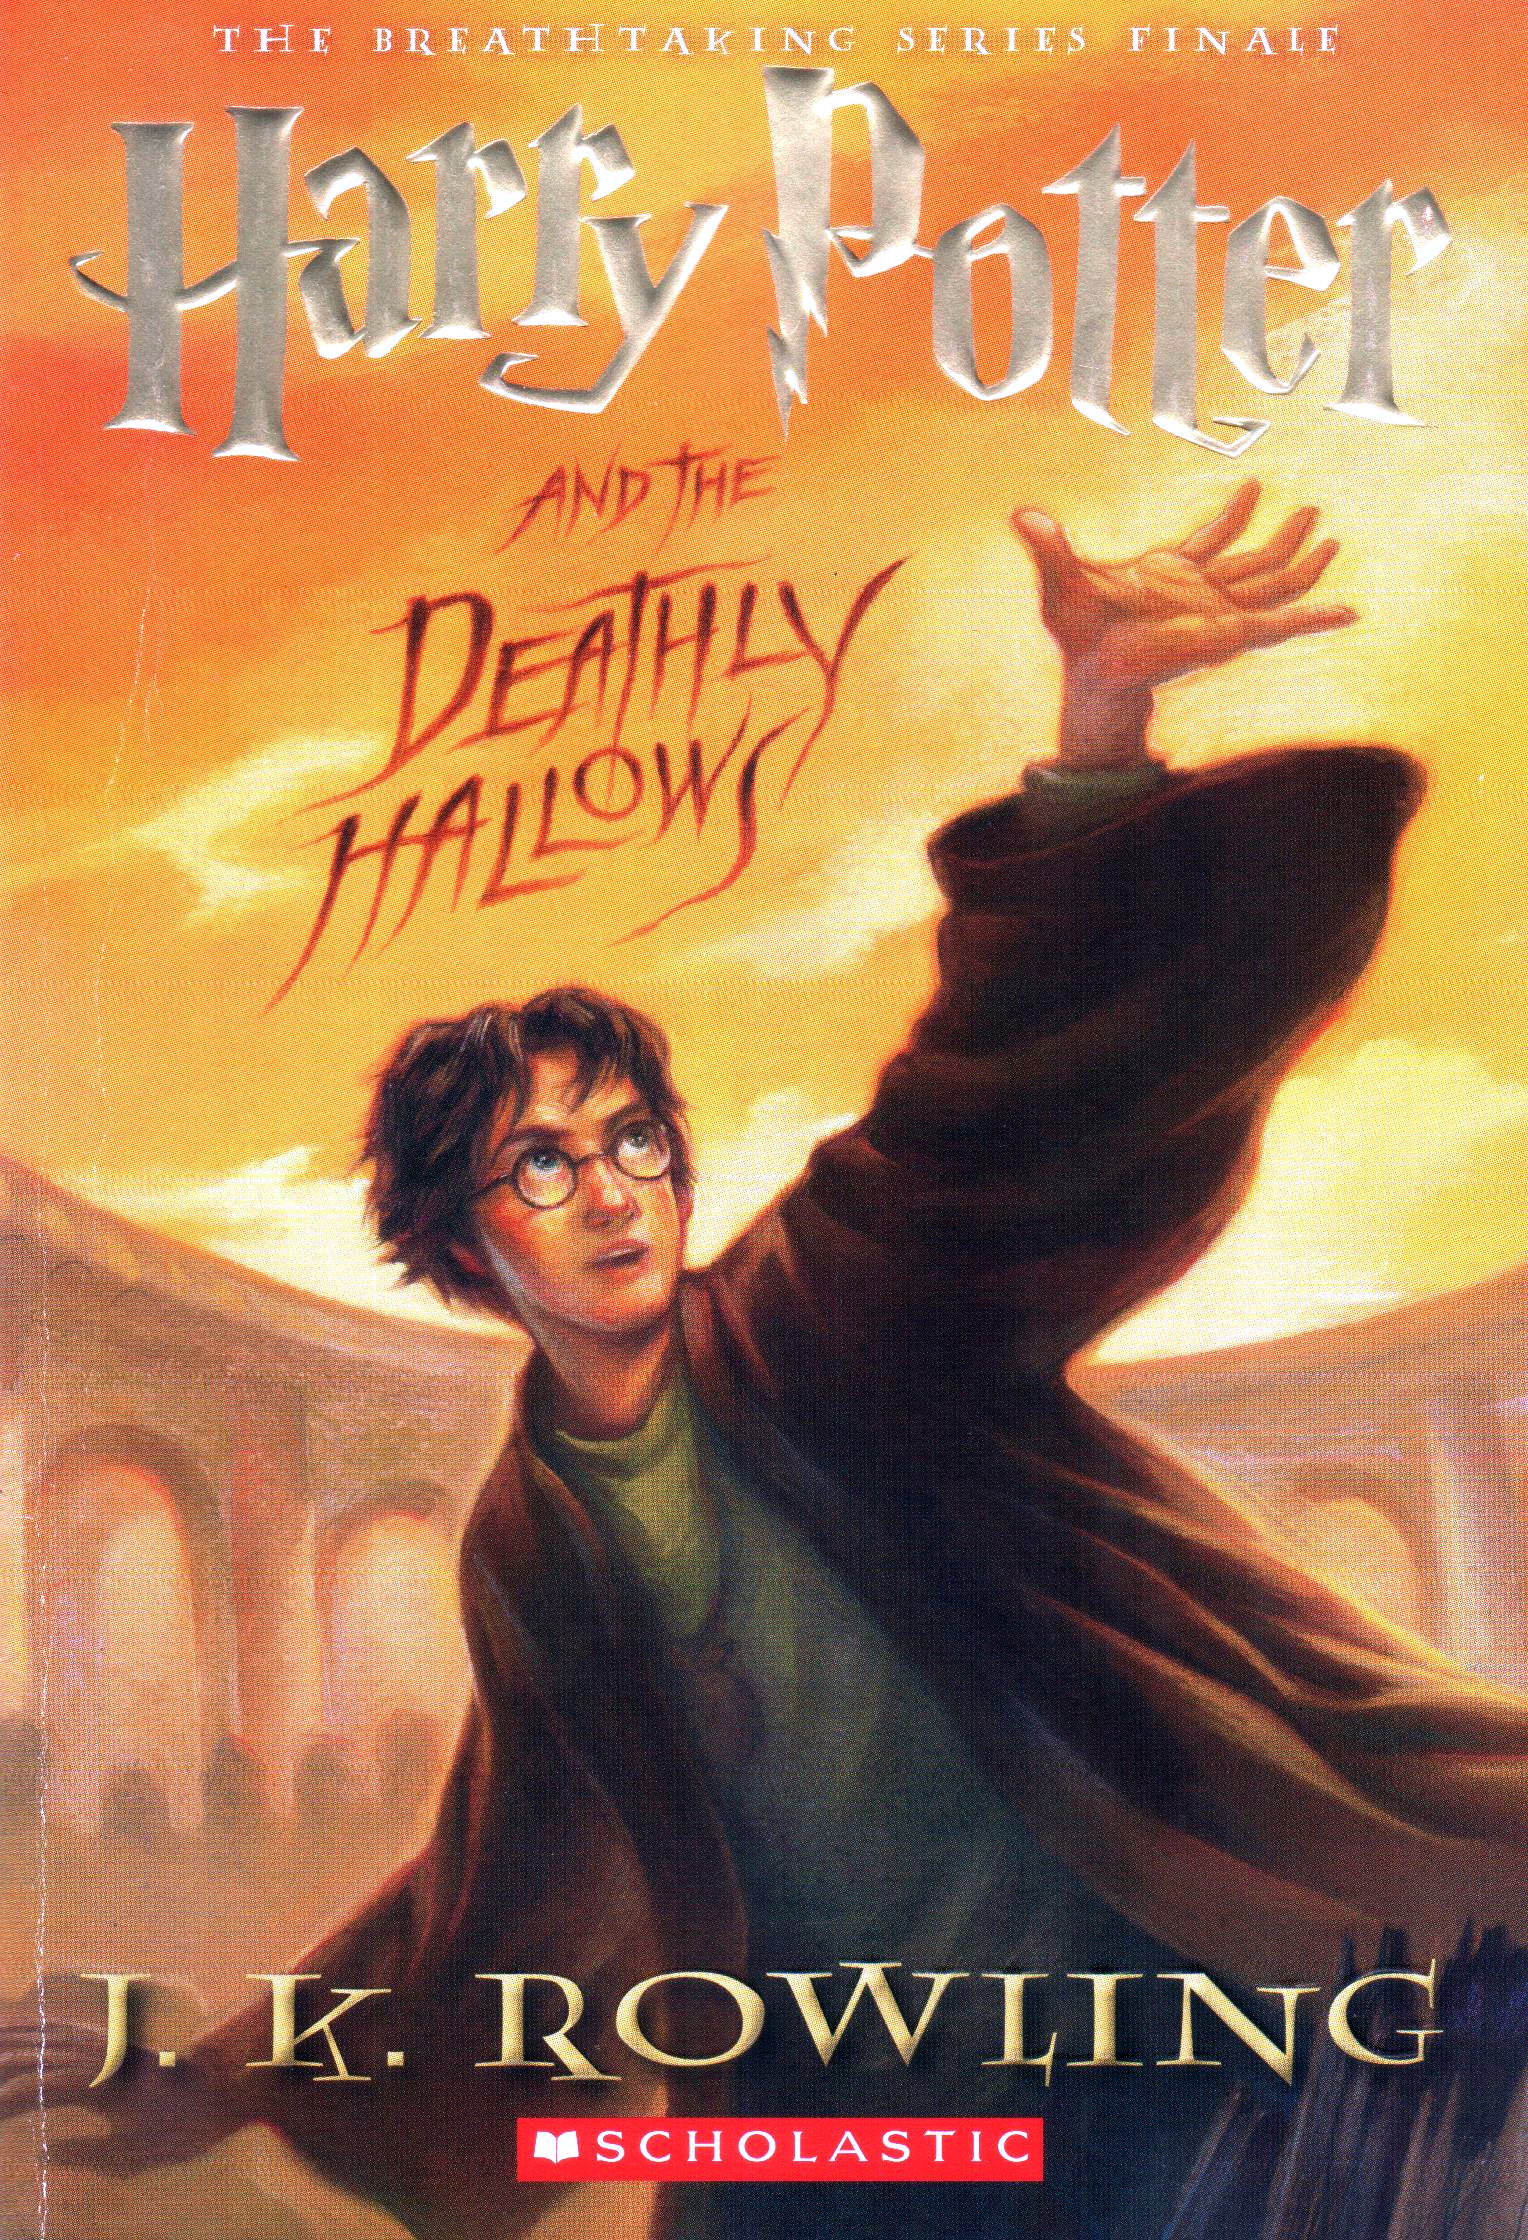 Harry Potter (7) and the Deathly Hallows